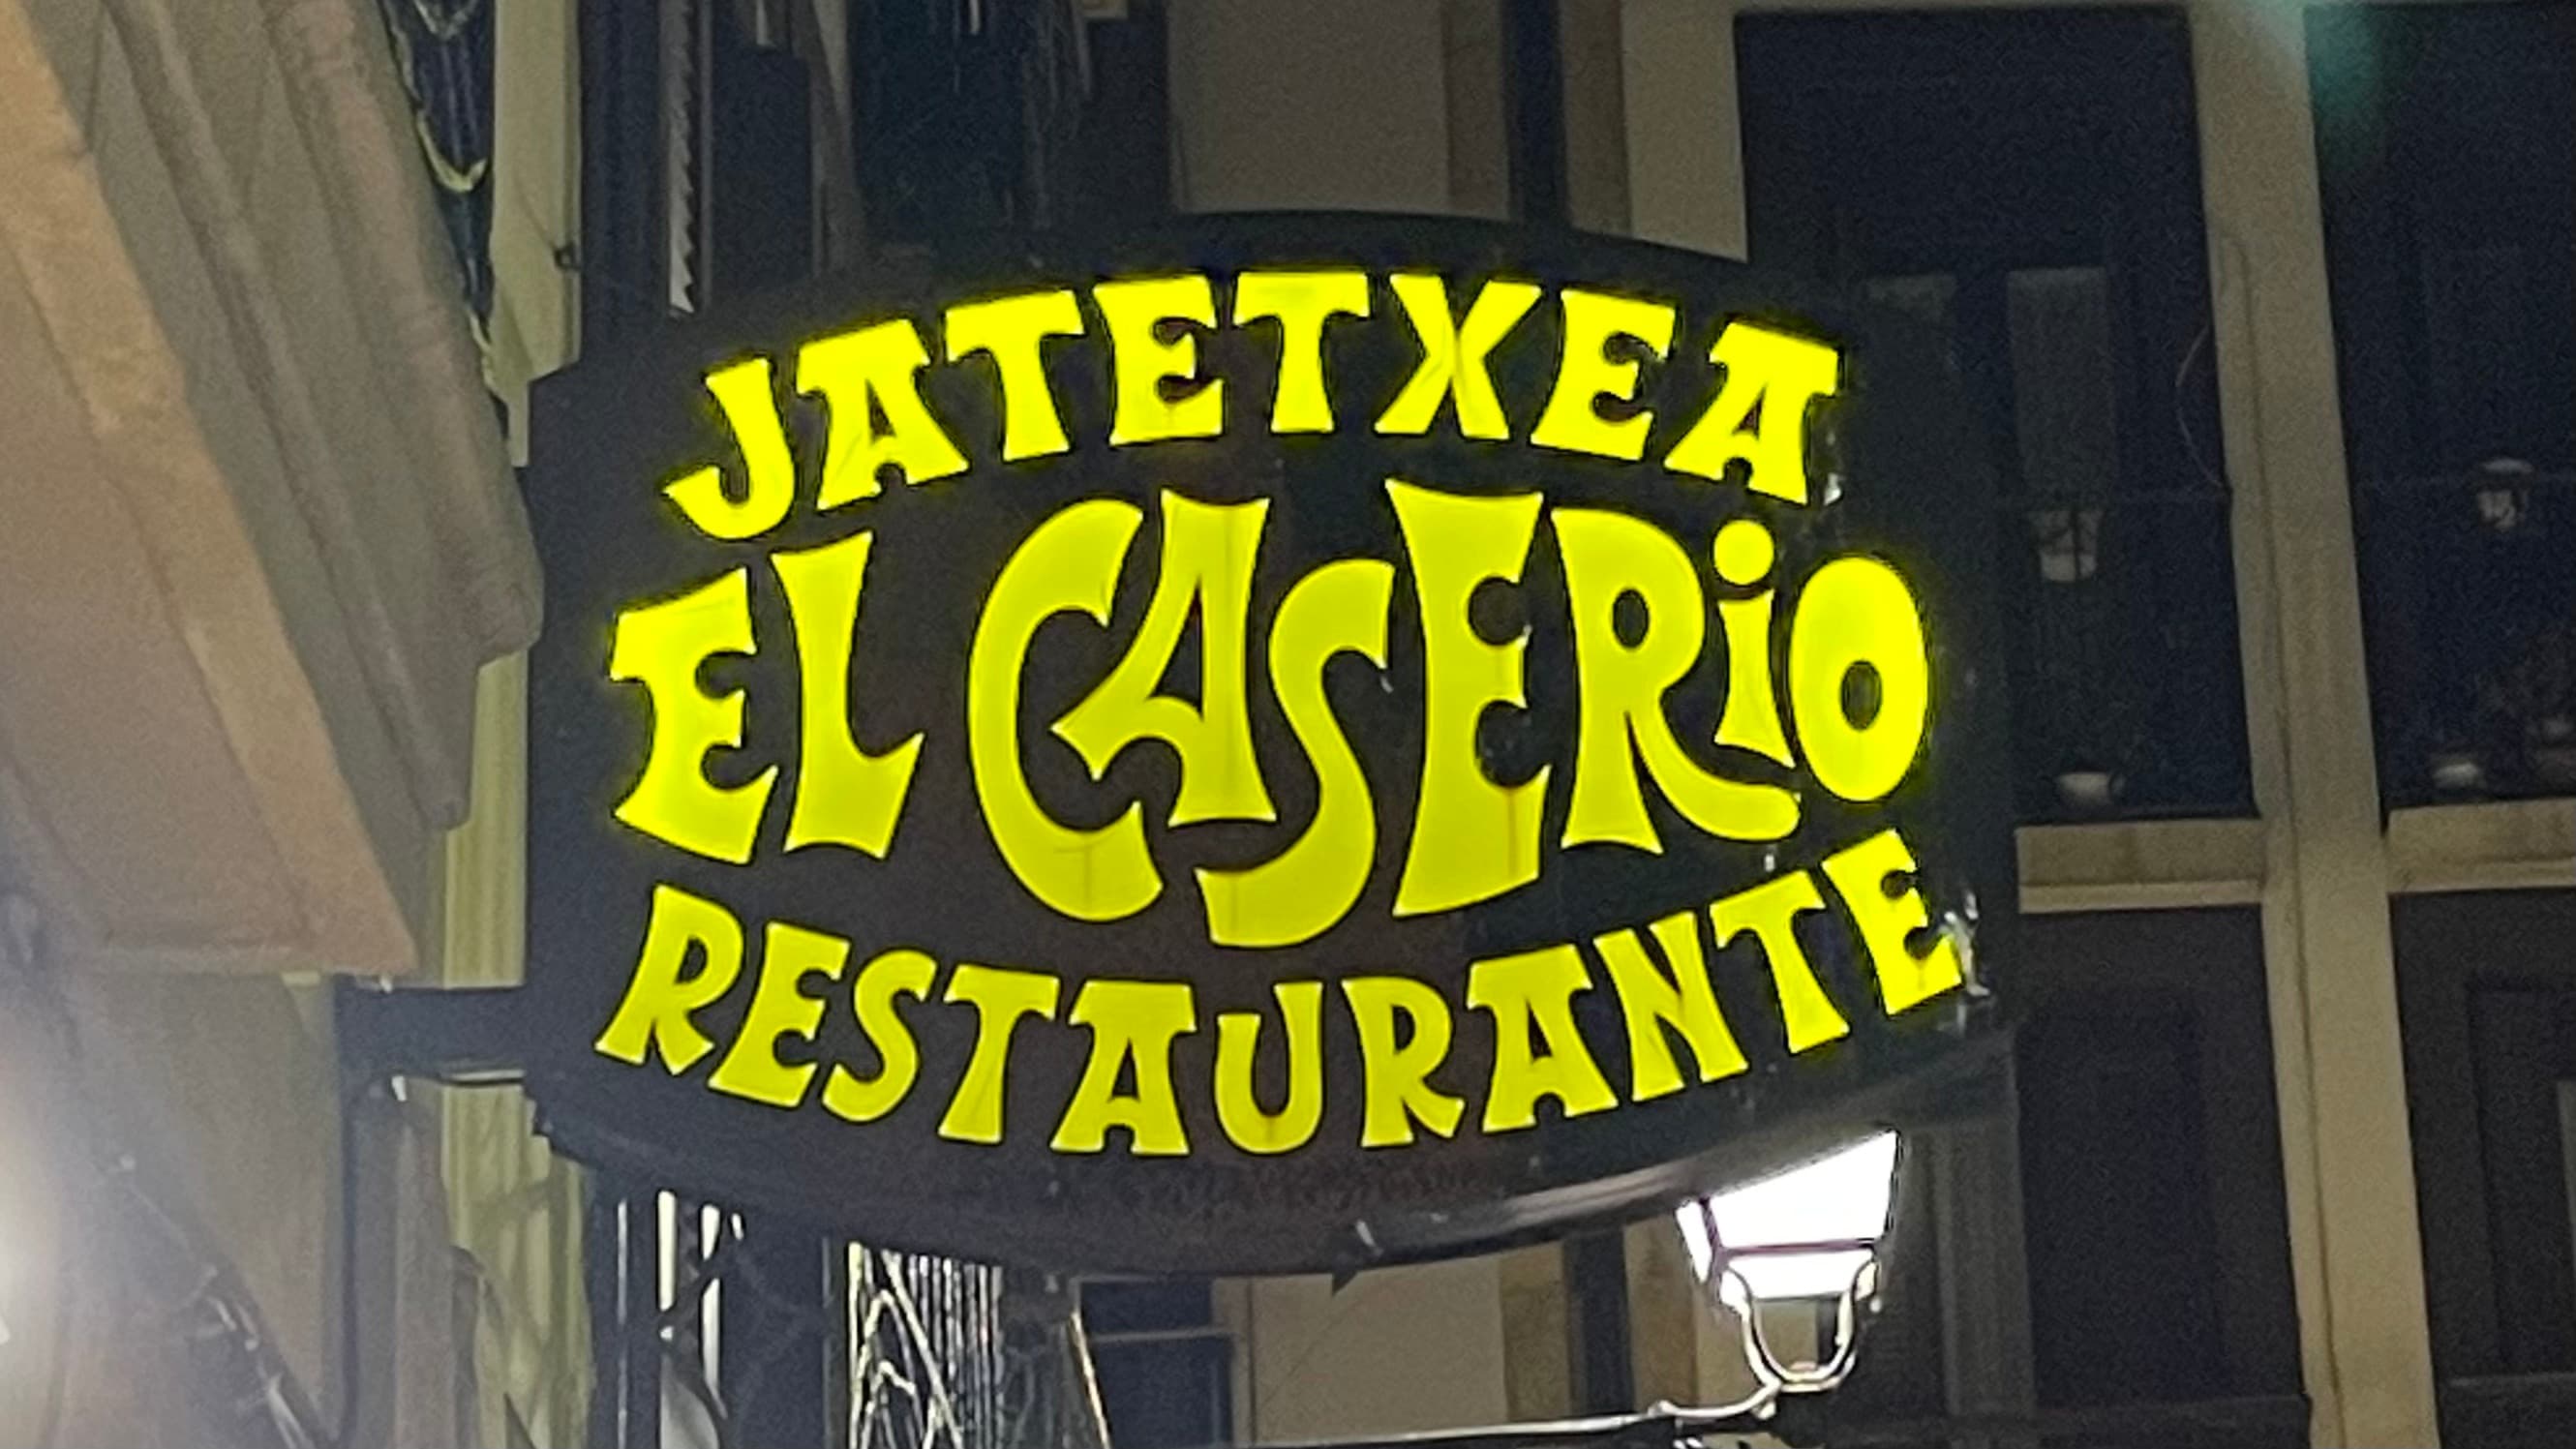 A restaurant sign written in Basque with large, bold yellow letters on a black background.